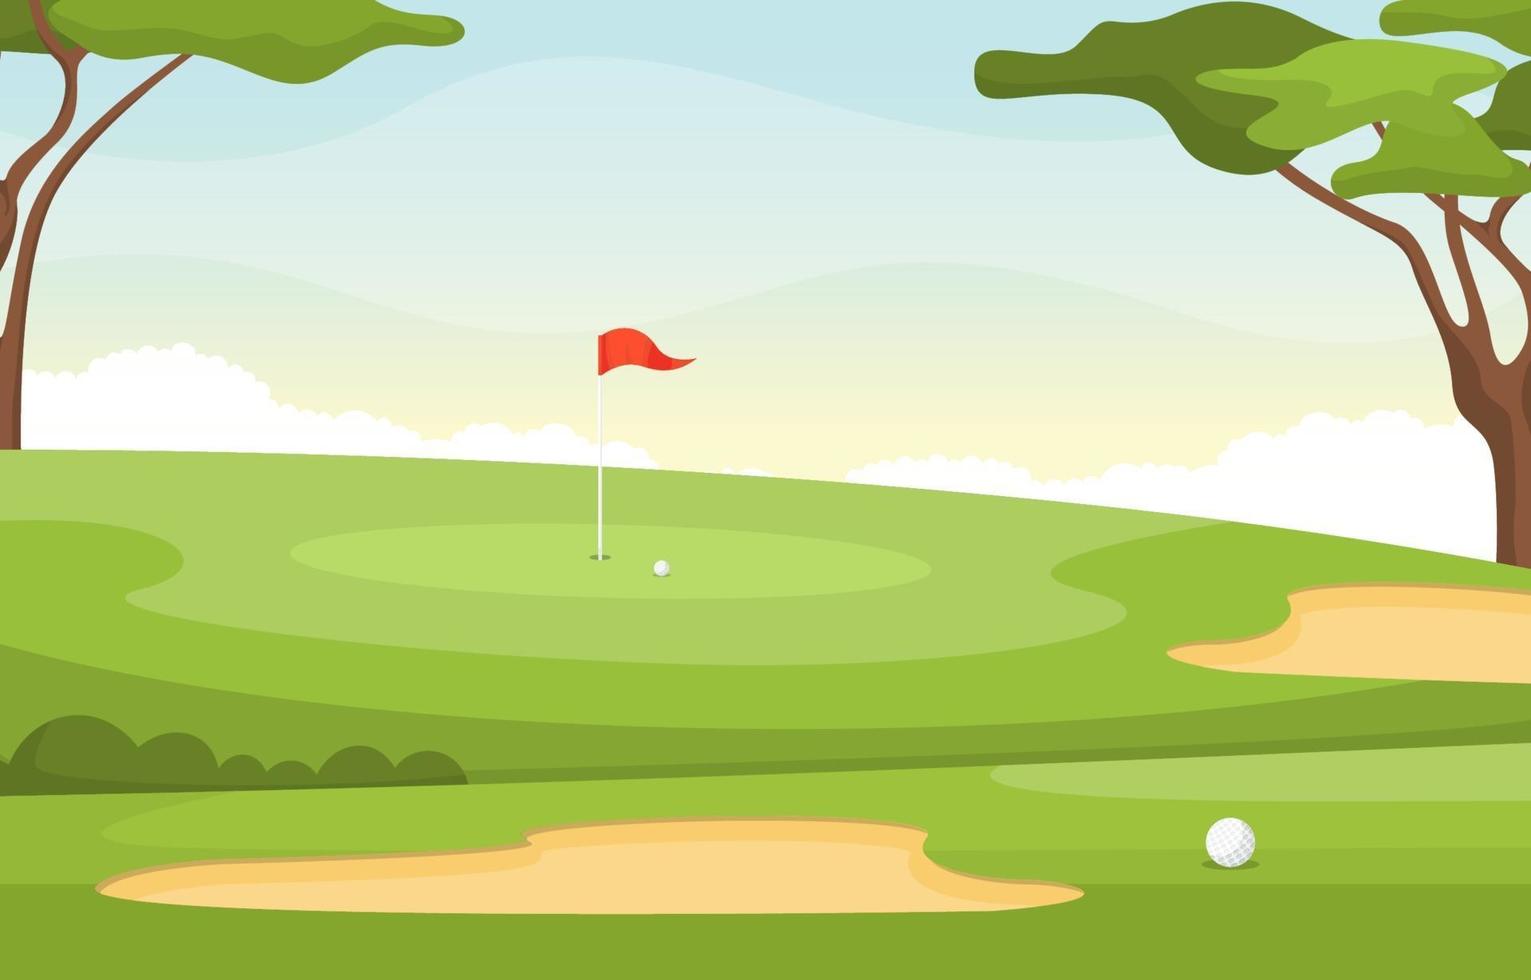 Golf Course with Red Flag, Trees, Sand Traps and Golf Ball vector